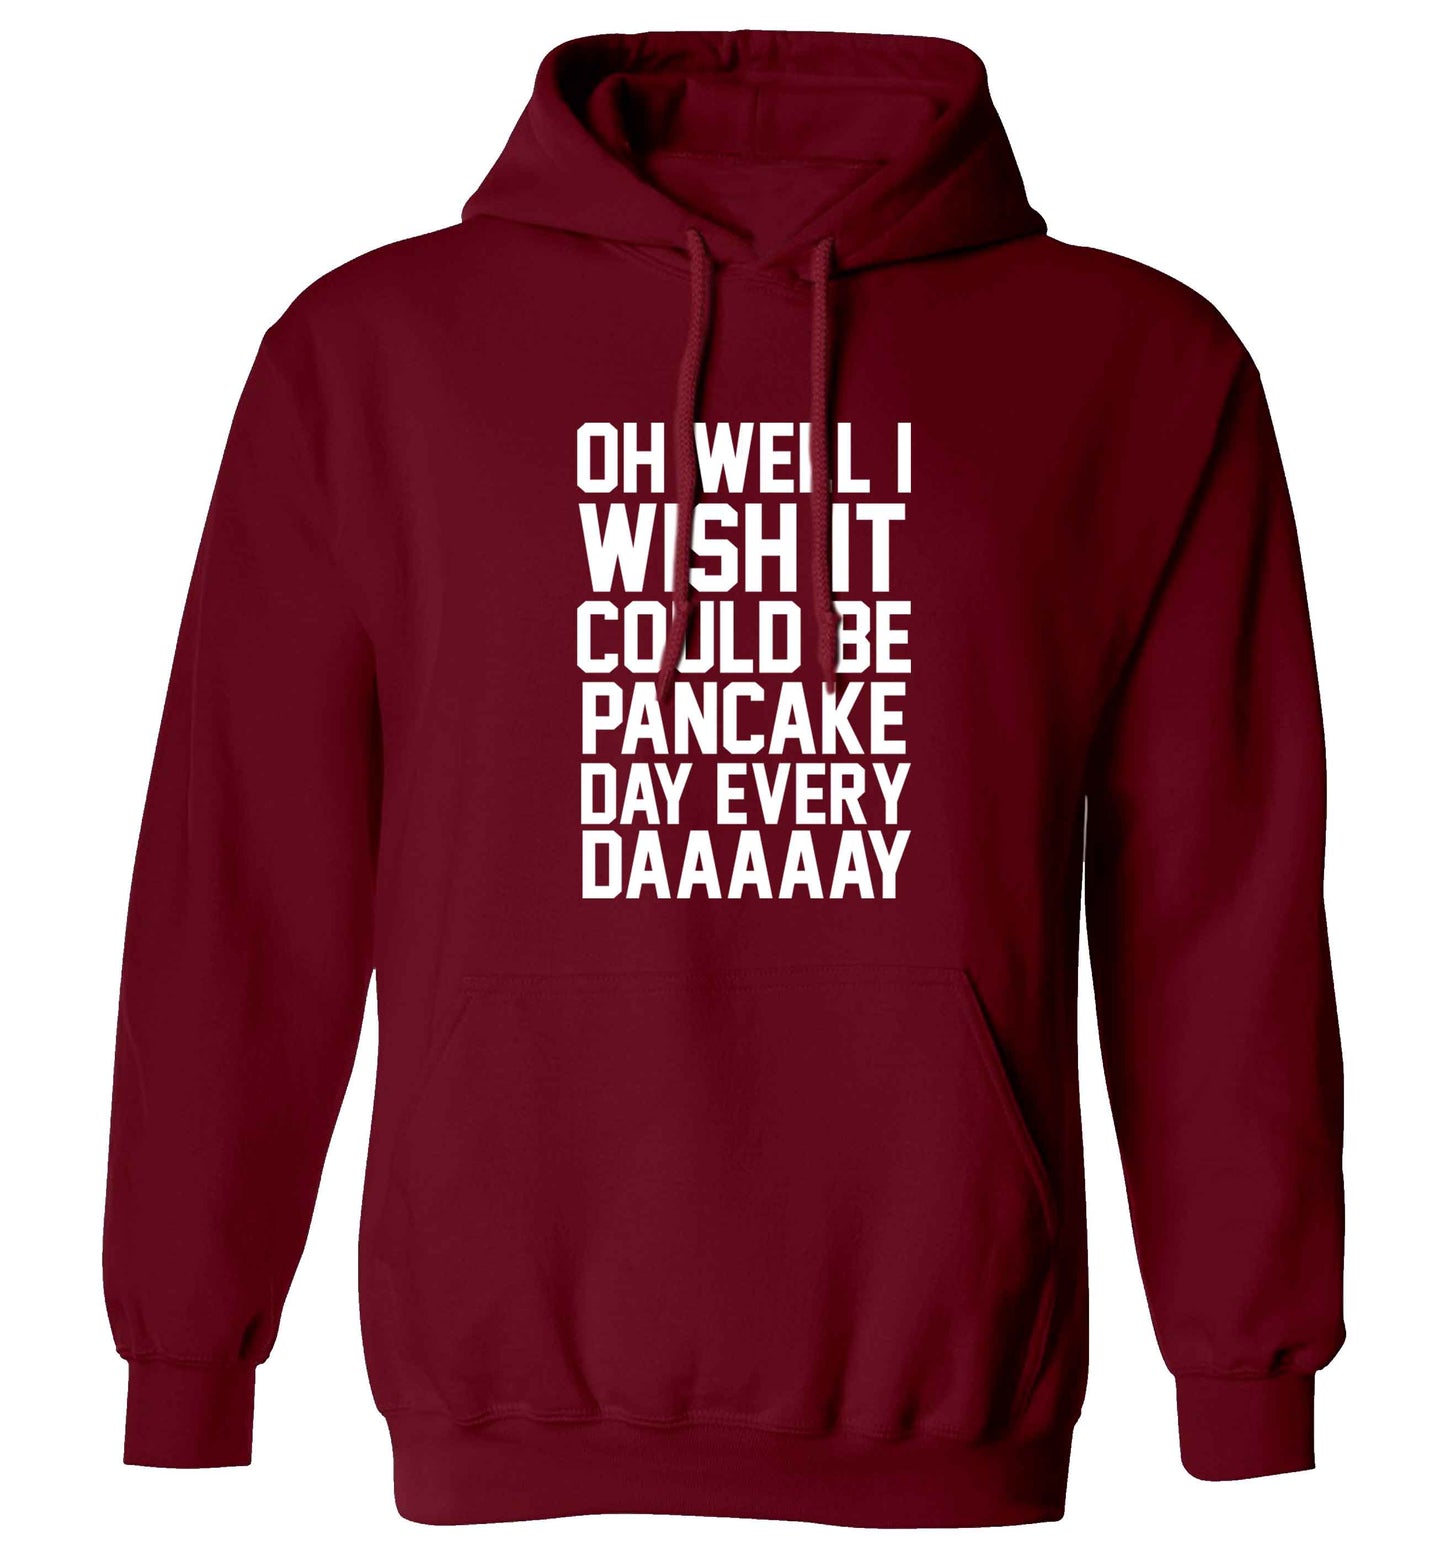 Oh well I wish it could be pancake day every day adults unisex maroon hoodie 2XL